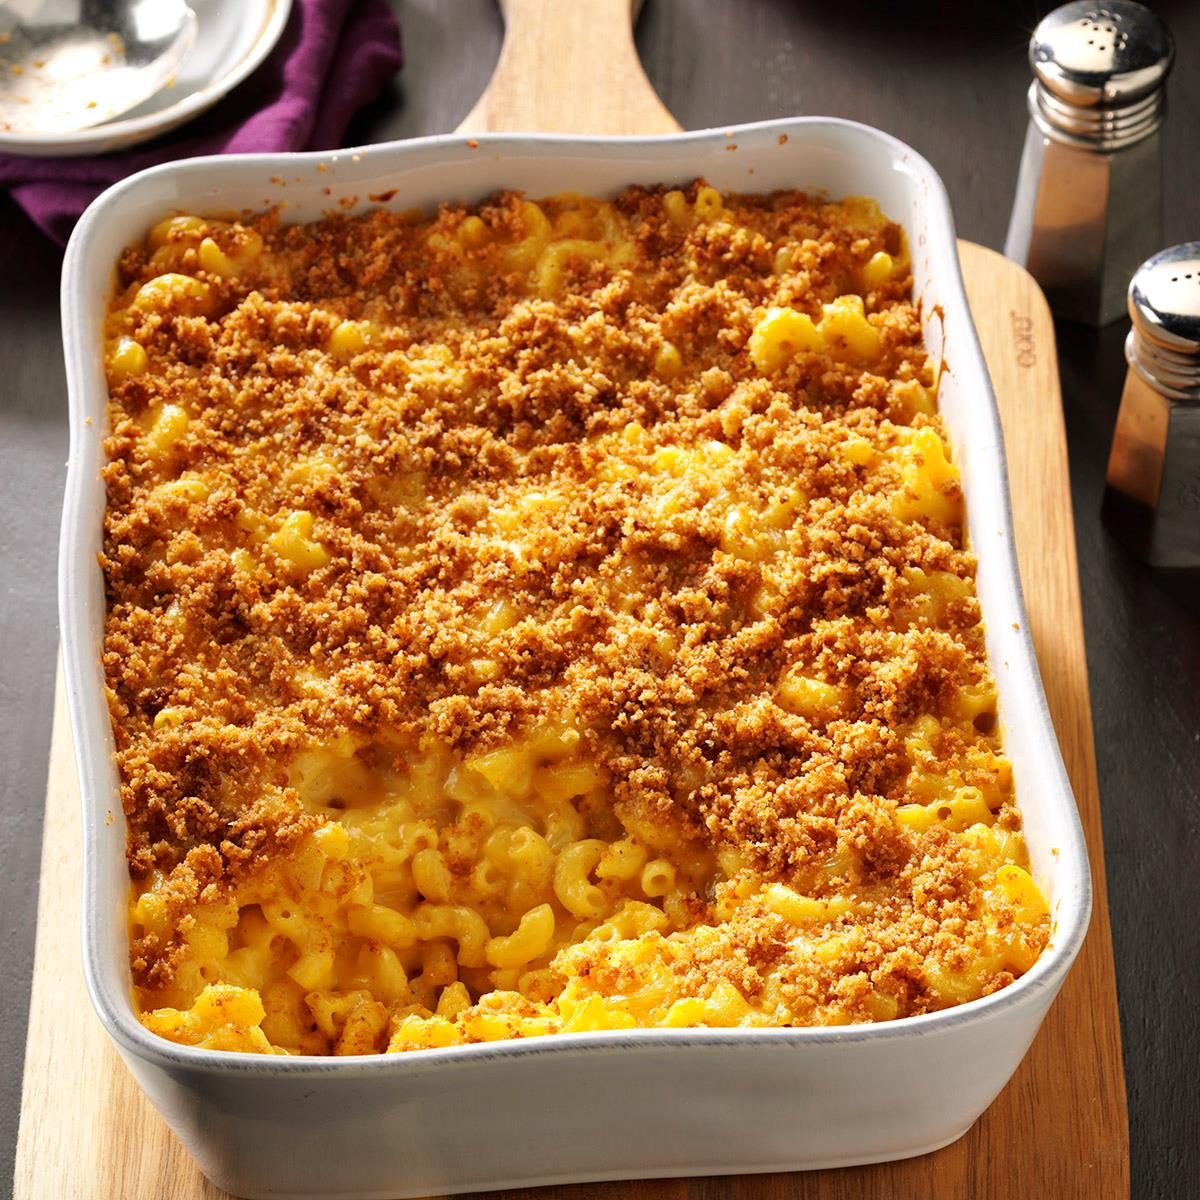 baked-mac-and-cheese-recipe-how-to-make-it-taste-of-home